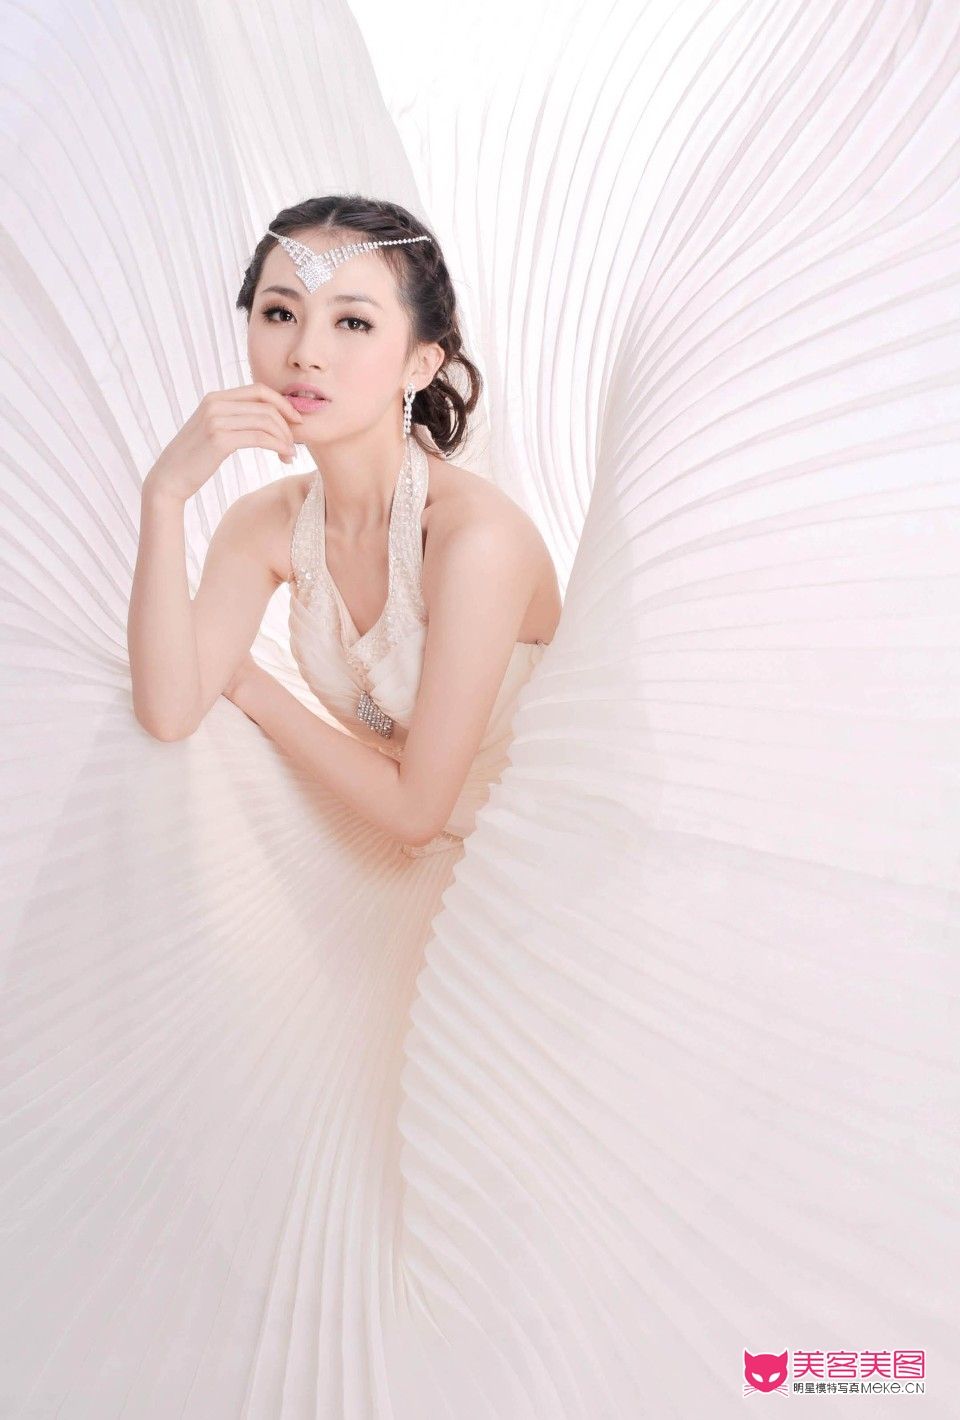 Chen Lu Sexy and Hottest Photos , Latest Pics